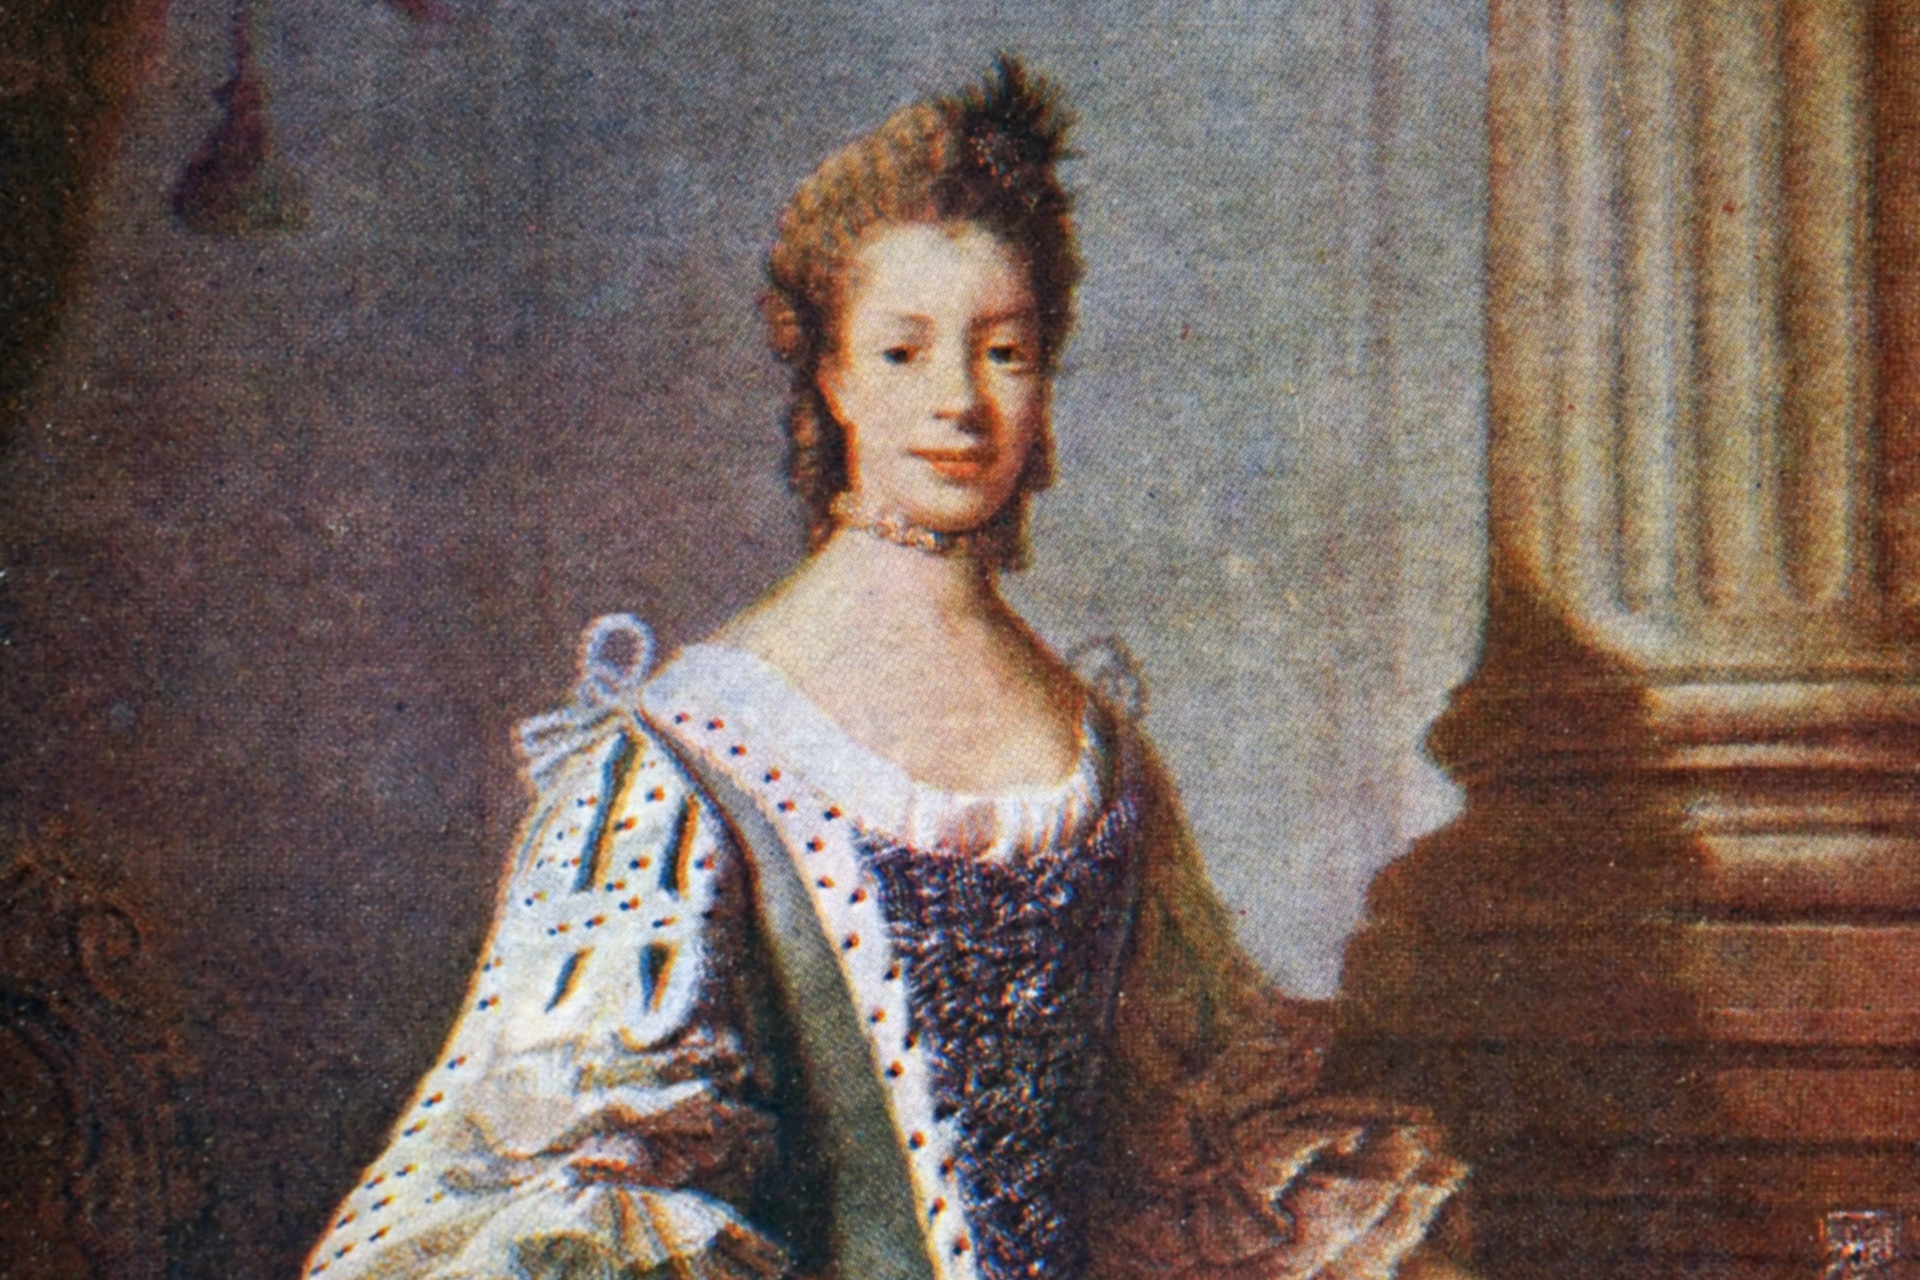 <p>Allan Ramsay's late 18th-century painting (pictured) shows Queen Charlotte from a new perspective. Many see 'African' features on her face, with a slightly tanned complexion, more rounded nostrils, and relatively full lips. According to some historians, this painting could be proof of her mixed origins. Currently, no African ancestry has been found in her genealogy, but historians say she has Portuguese ancestry.</p>